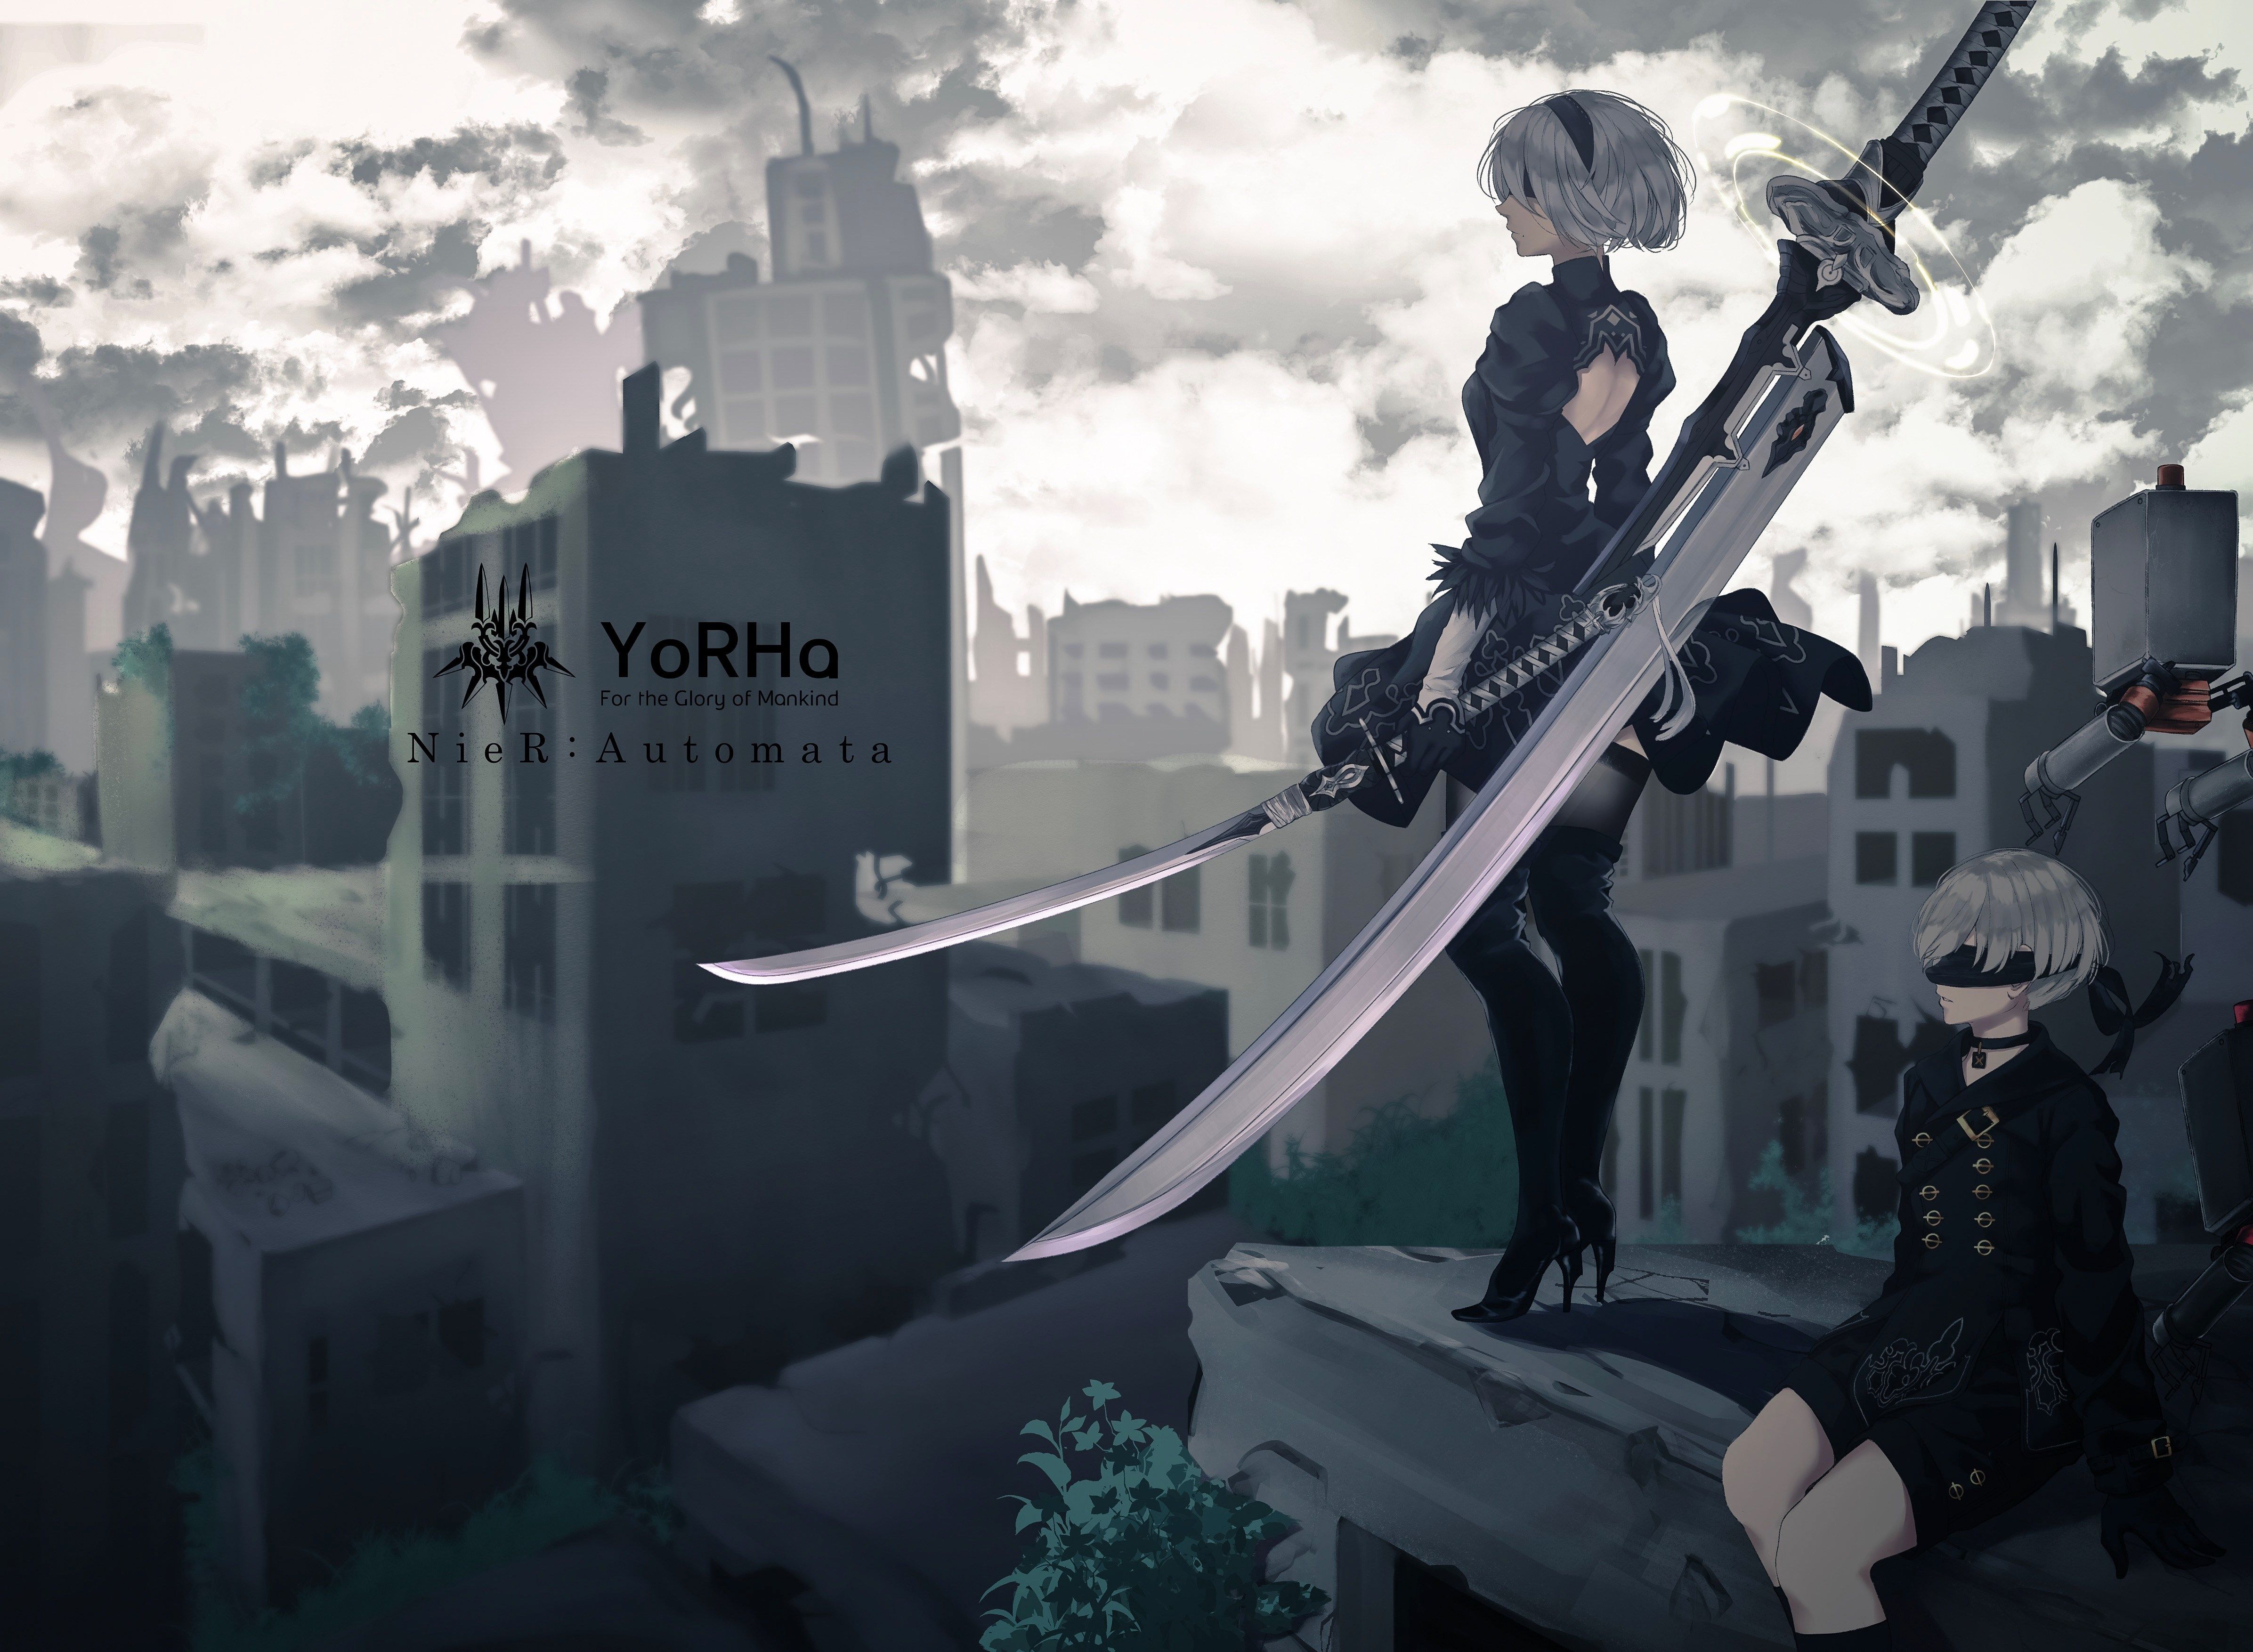 Background In High Quality automata. Nier automata, Automata, Nier automata game